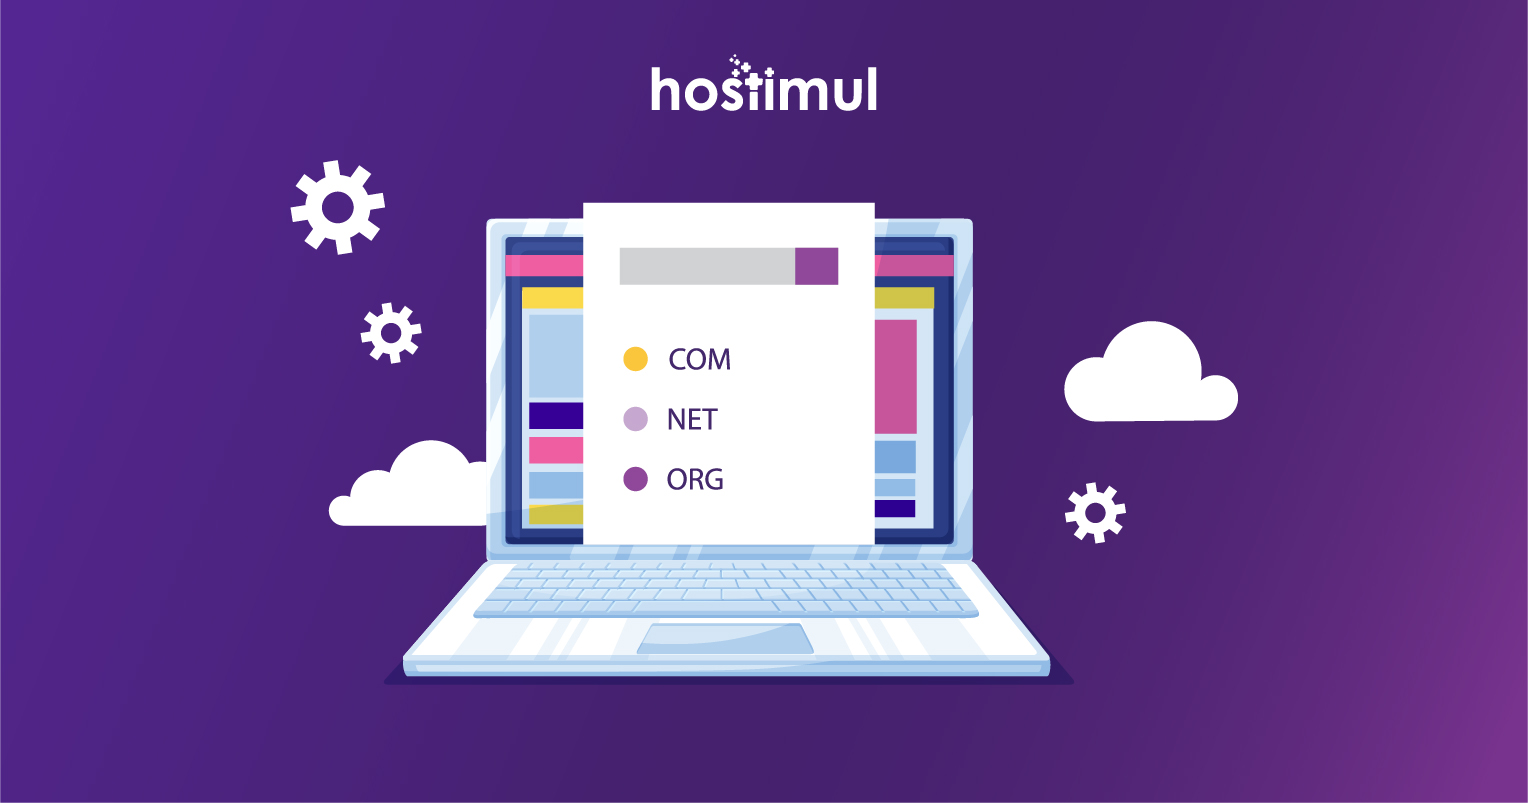 How to choose a domain name?